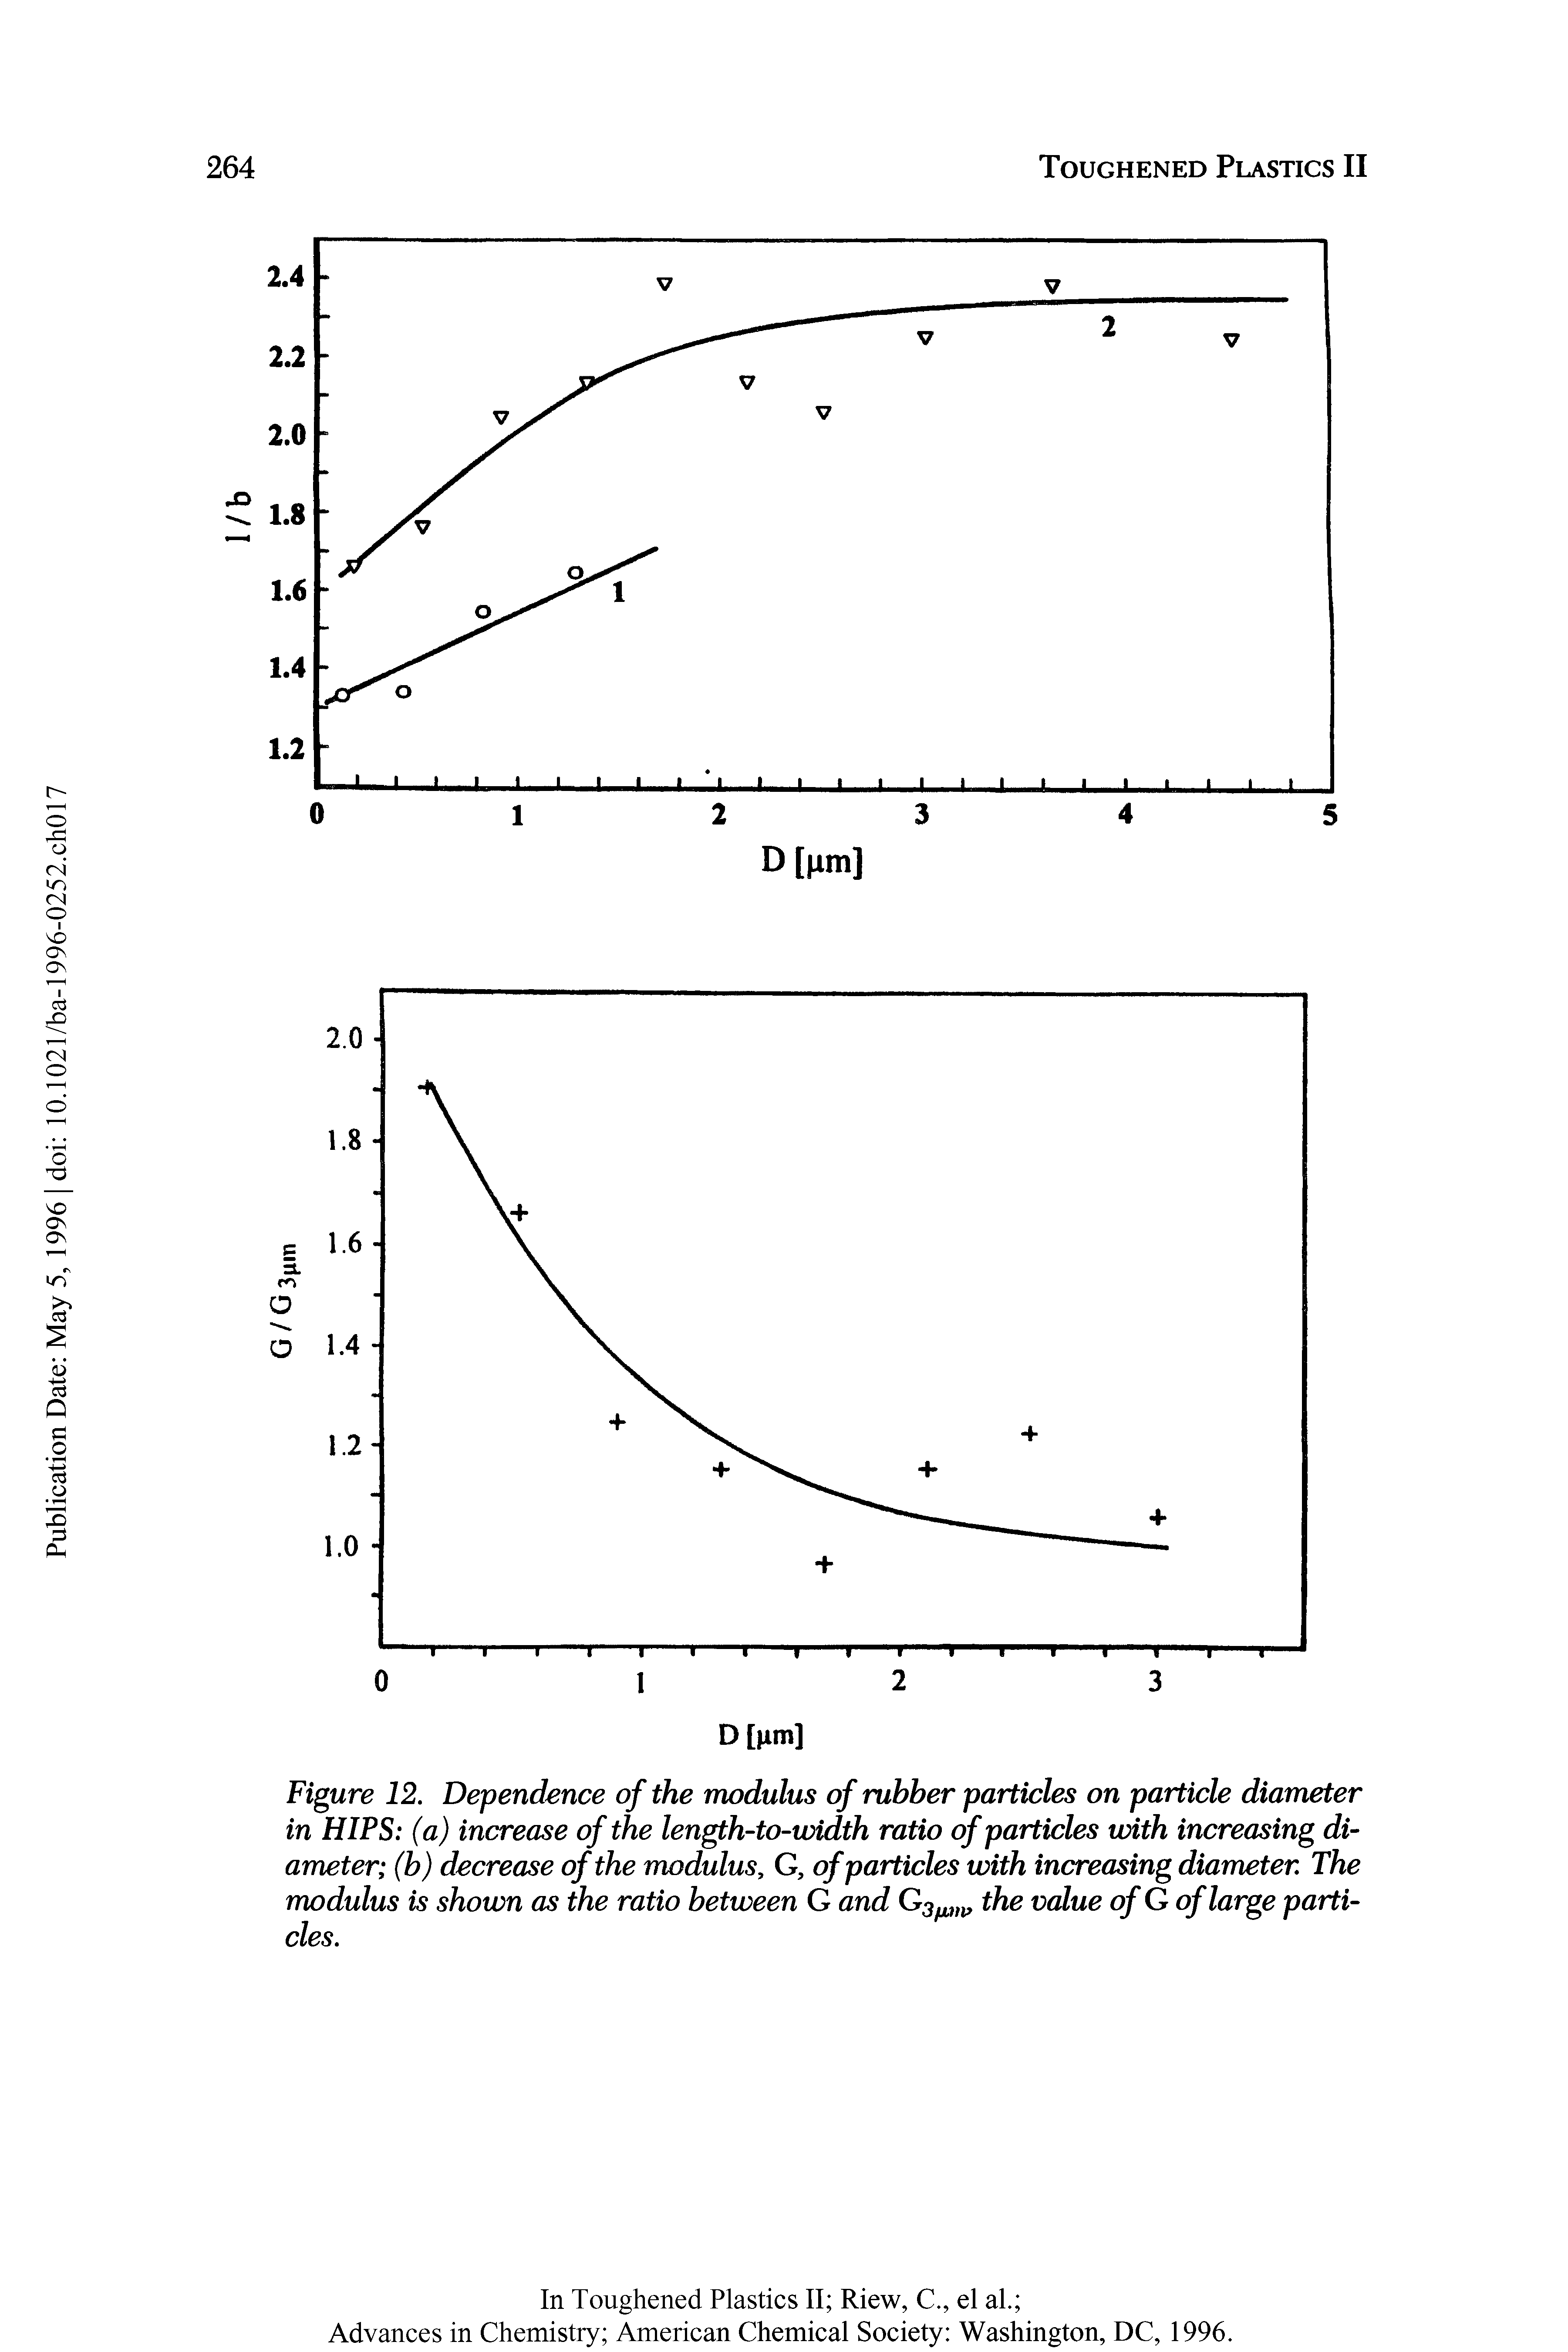 Figure 12. Dependence of the modulus of rubber particles on particle diameter in HIPS (a) increase of the length-to-width ratio of particles with increasing diameter (b) decrease of the modulus, G, of particles with increasing diameter. The modulus is shown as the ratio between G and G3fJLW the value of G of large particles.